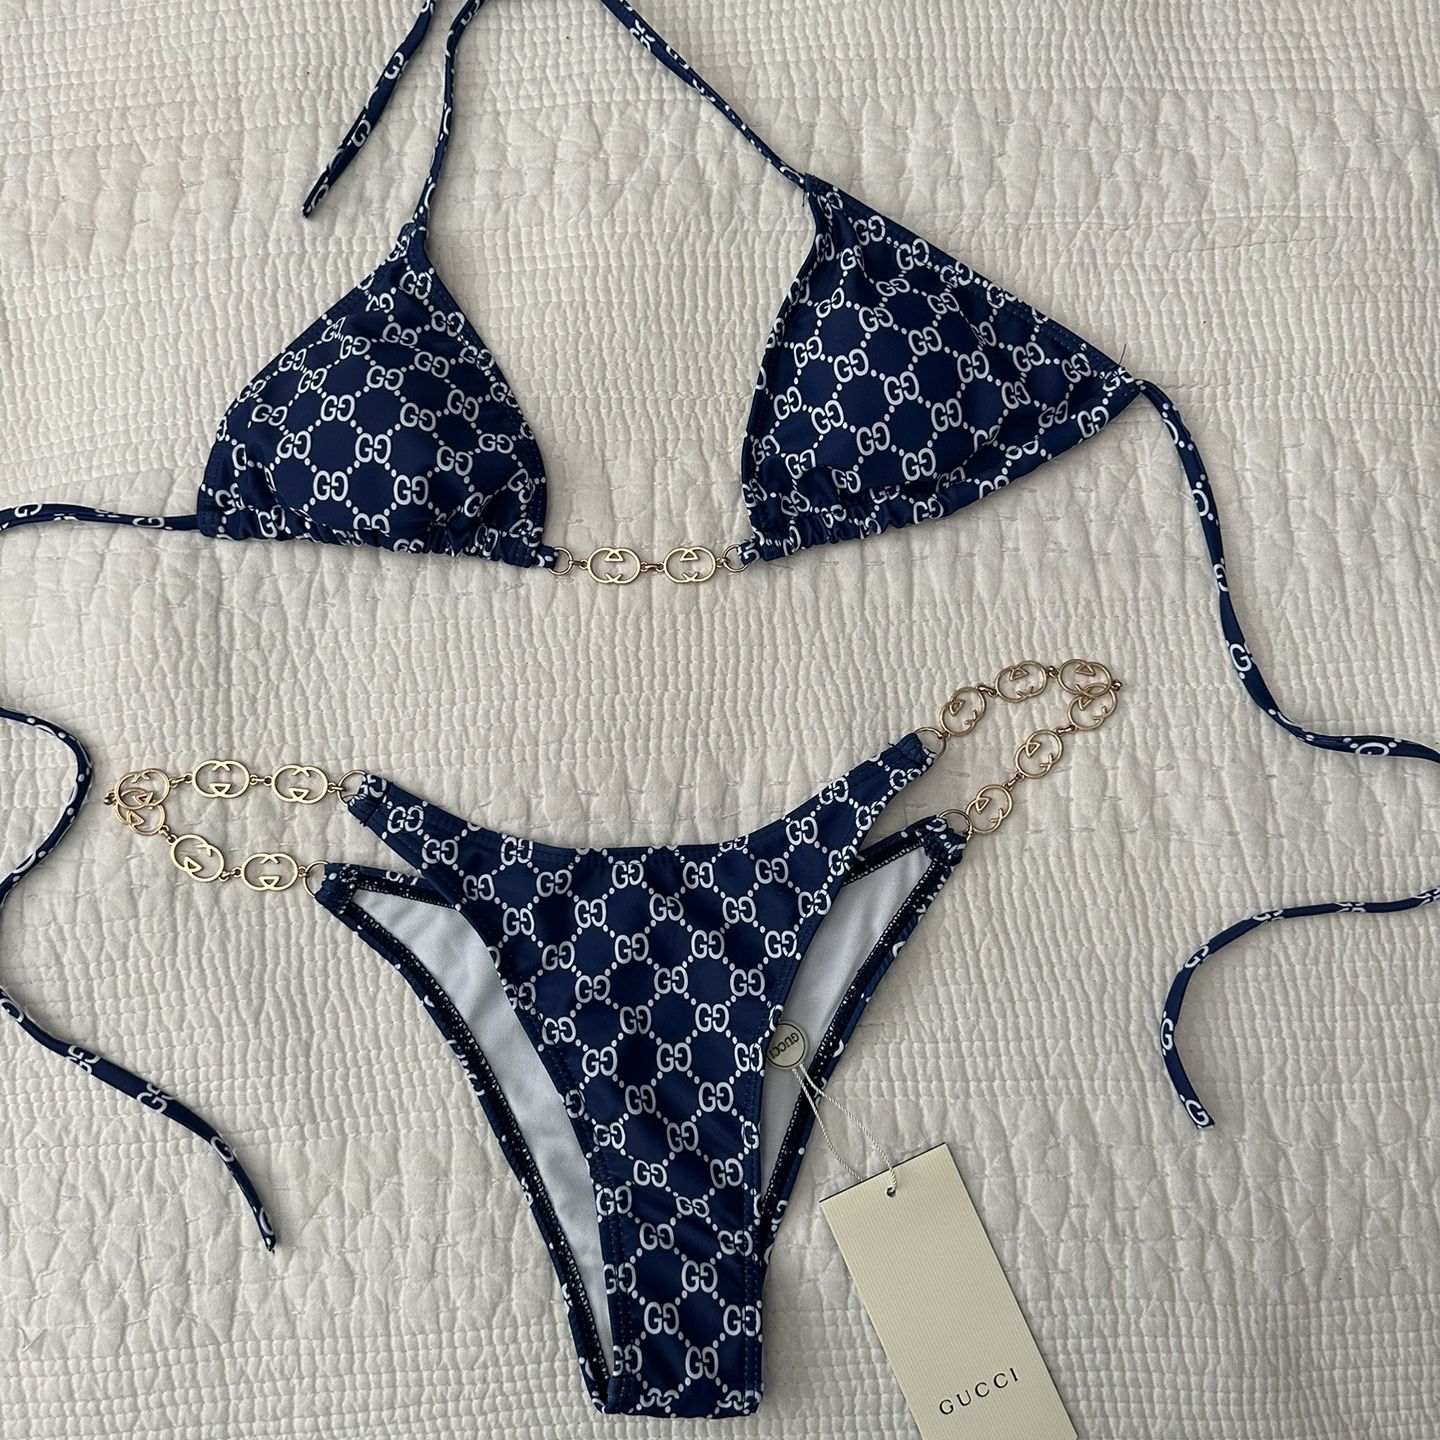 Lv Supreme Swimsuit for Sale in Las Vegas, NV - OfferUp